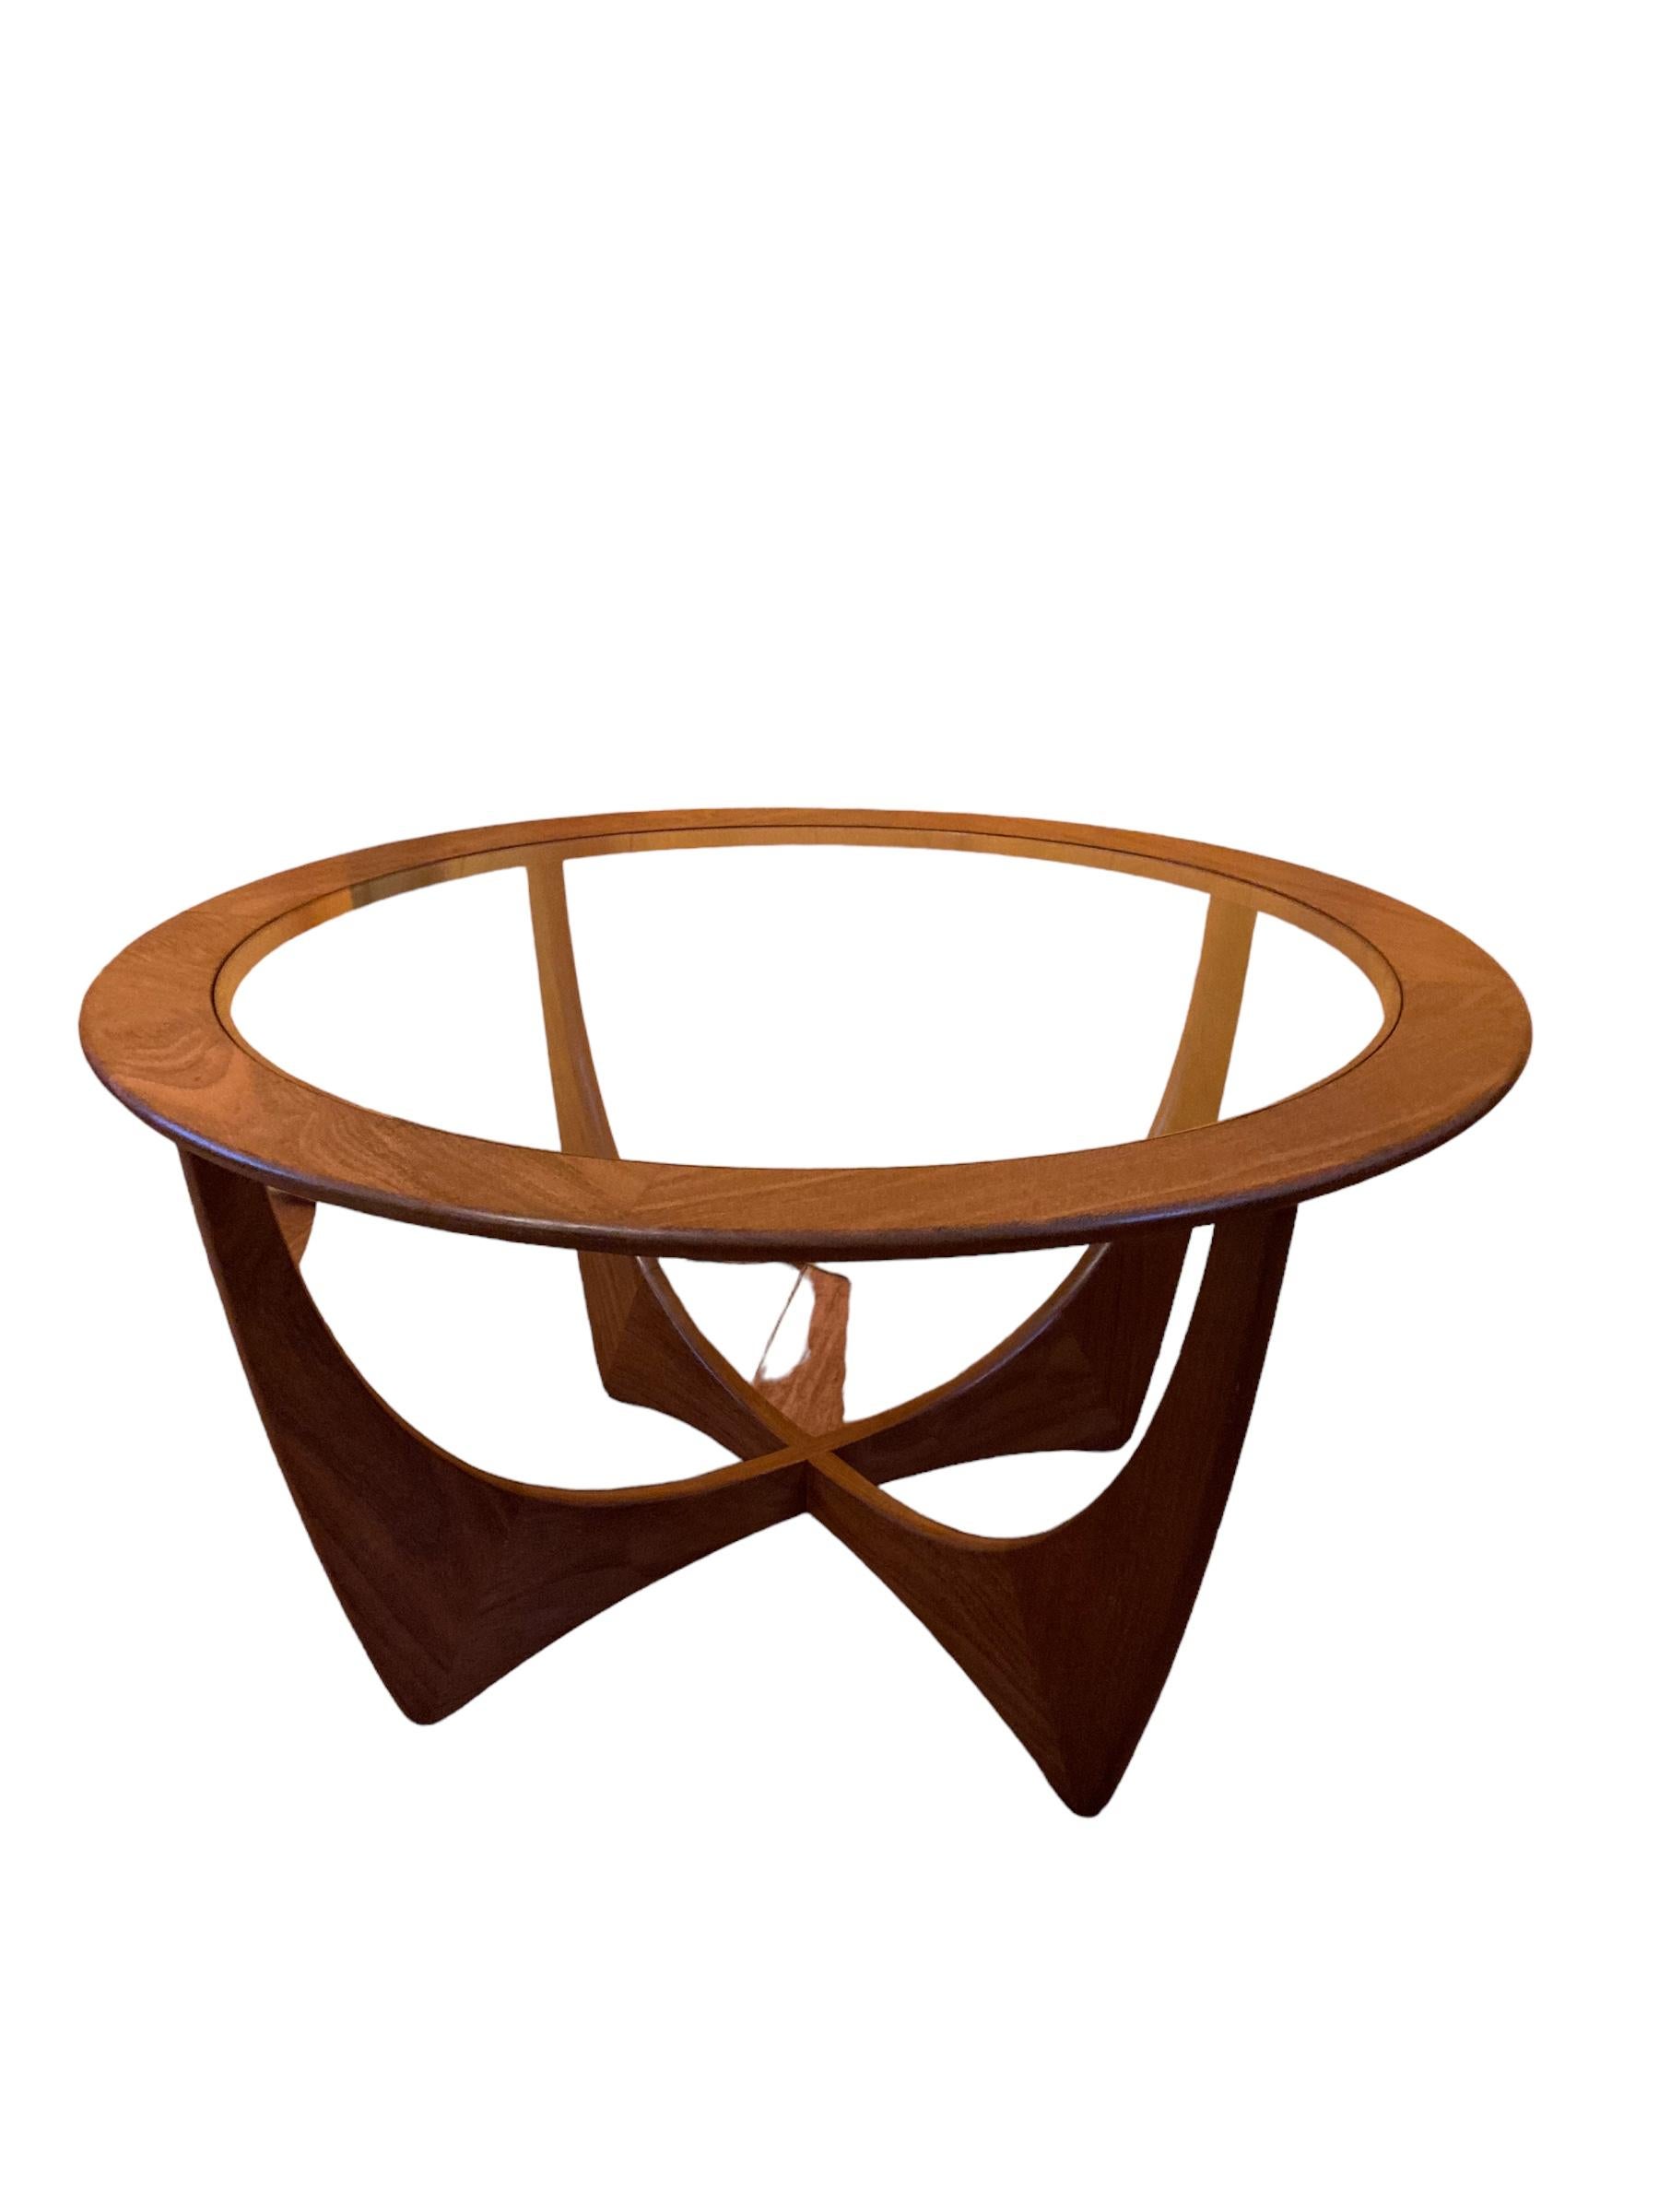 Round Astro Victor Wilkins for G-plan Coffee Table. Classic 1960's Astro design, solid teak wood with circular glass top.

H: 46 cm

W: 84 cm